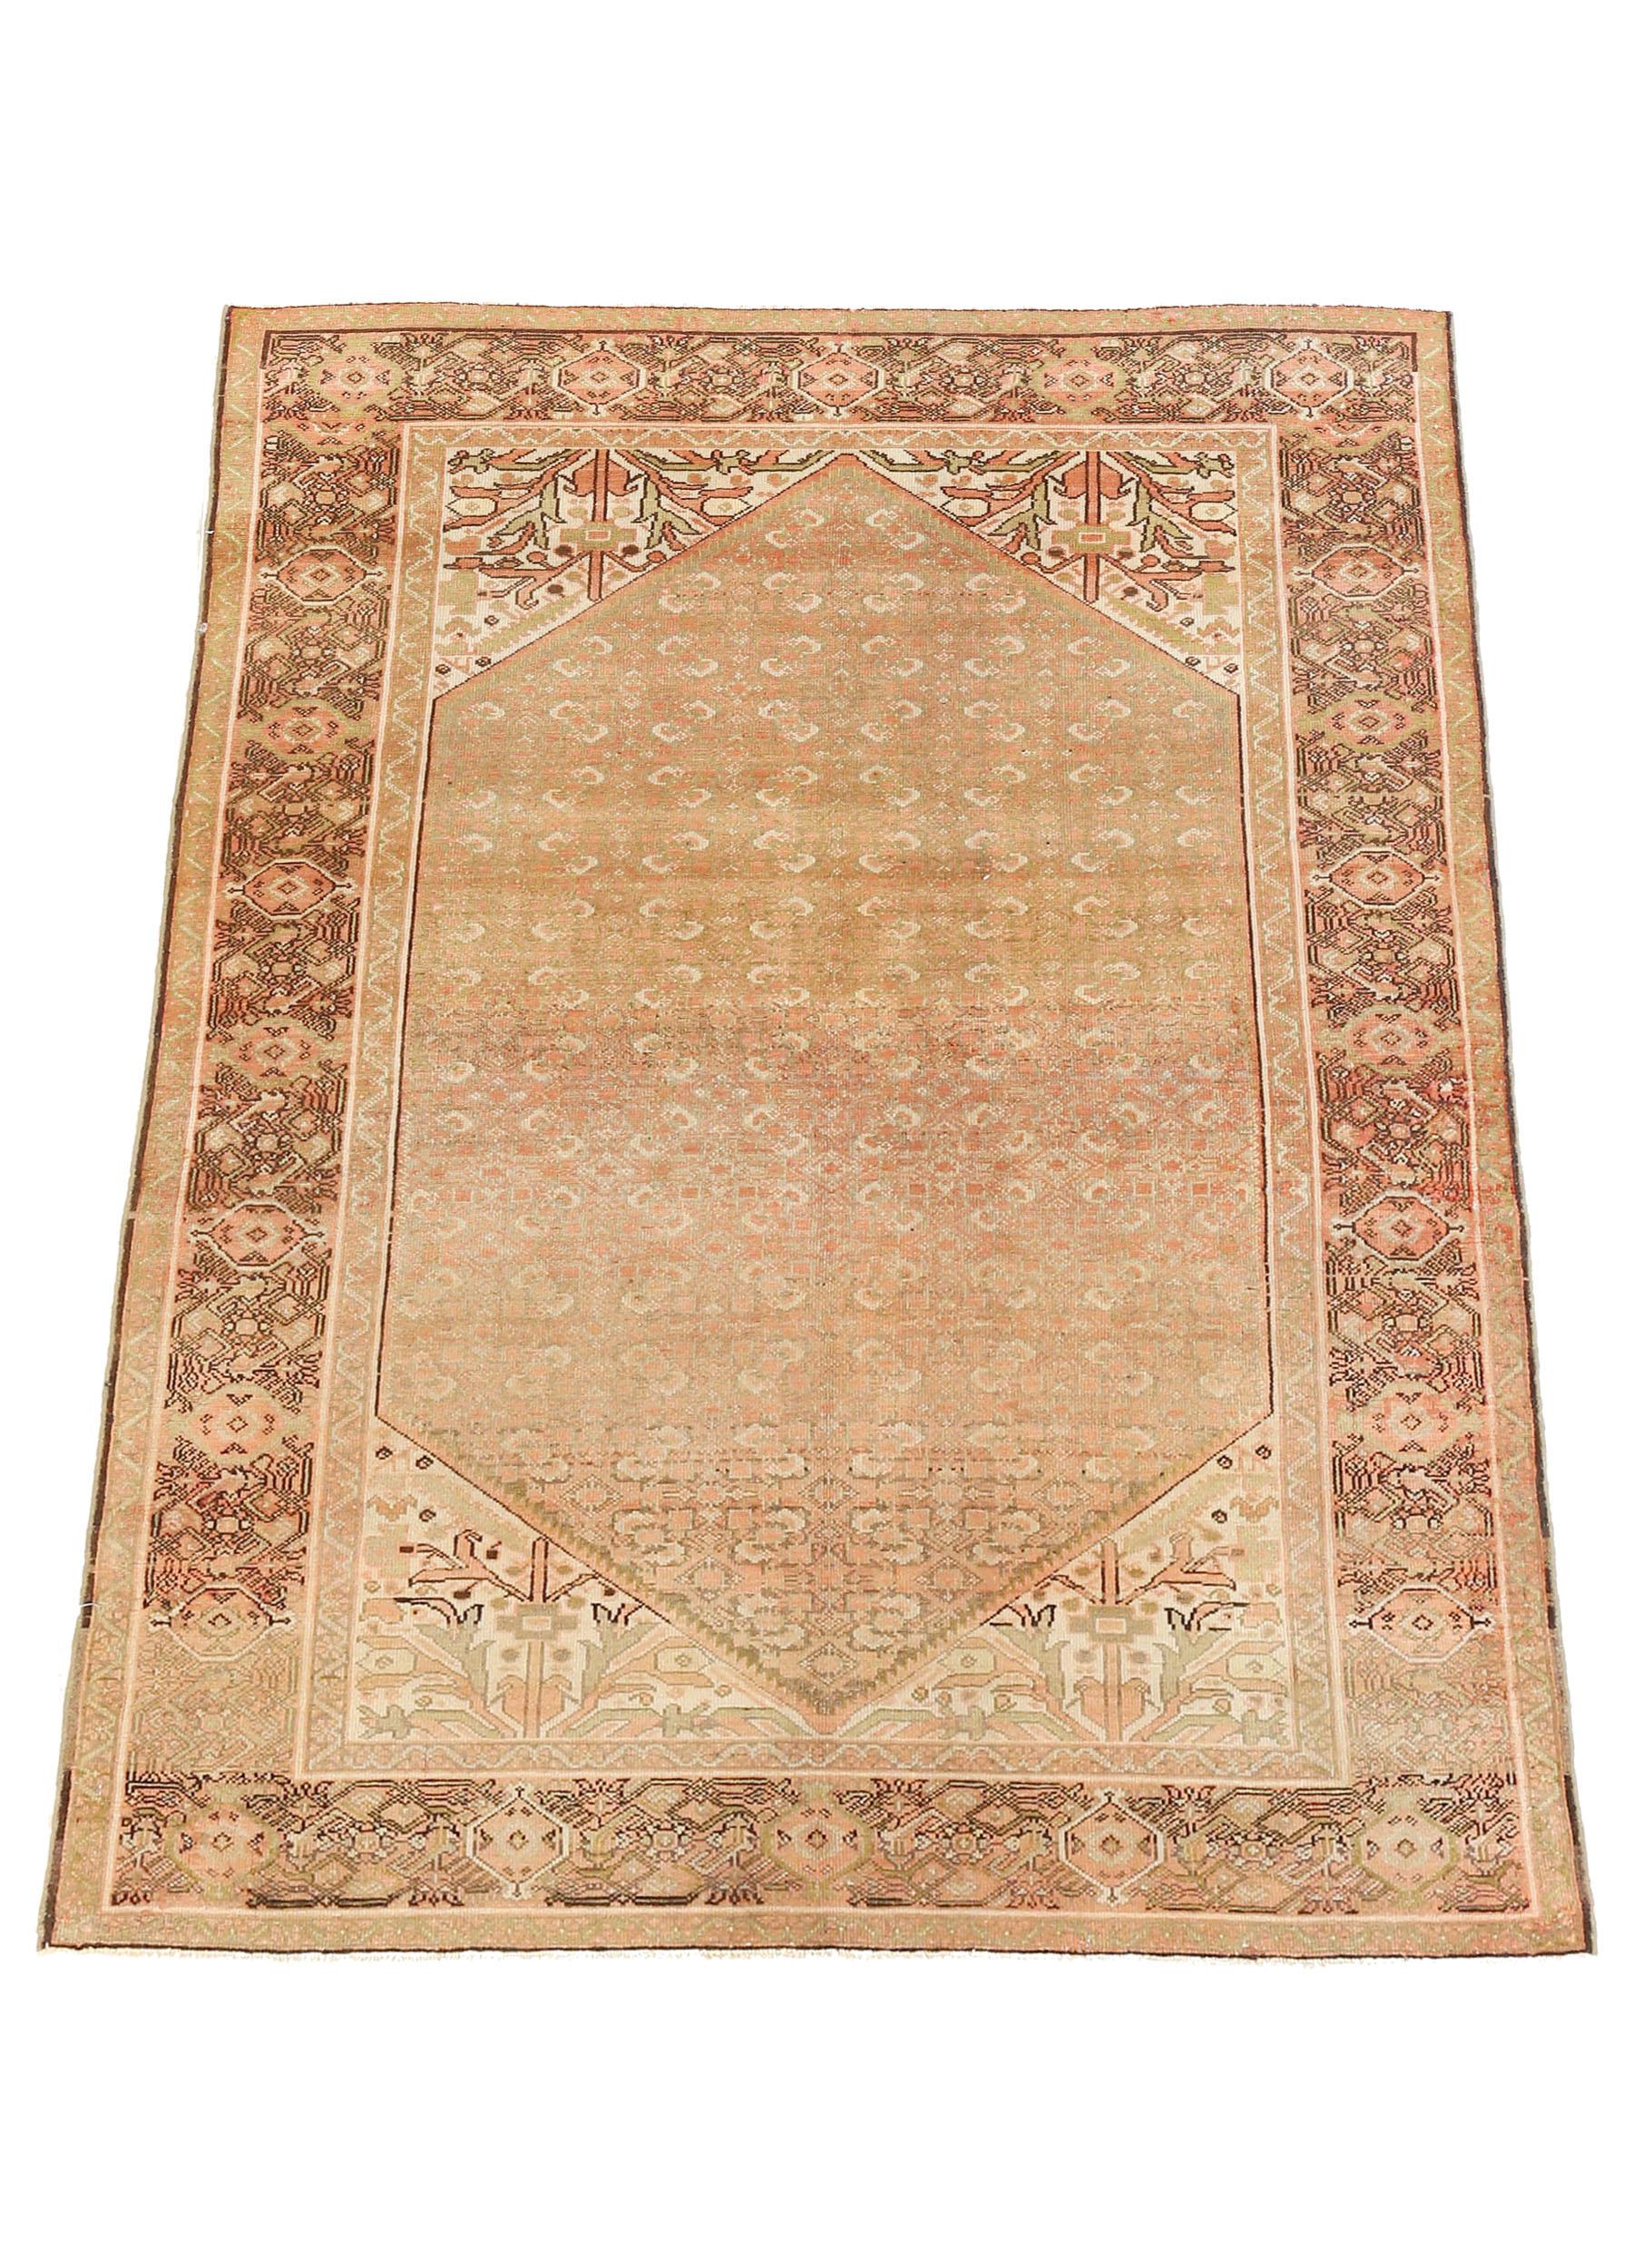 Antique Persian rug handwoven from the finest sheep’s wool and colored with all-natural vegetable dyes that are safe for humans and pets. It’s a traditional Malayer design featuring green and pink botanical details on an ivory field. It’s a lovely